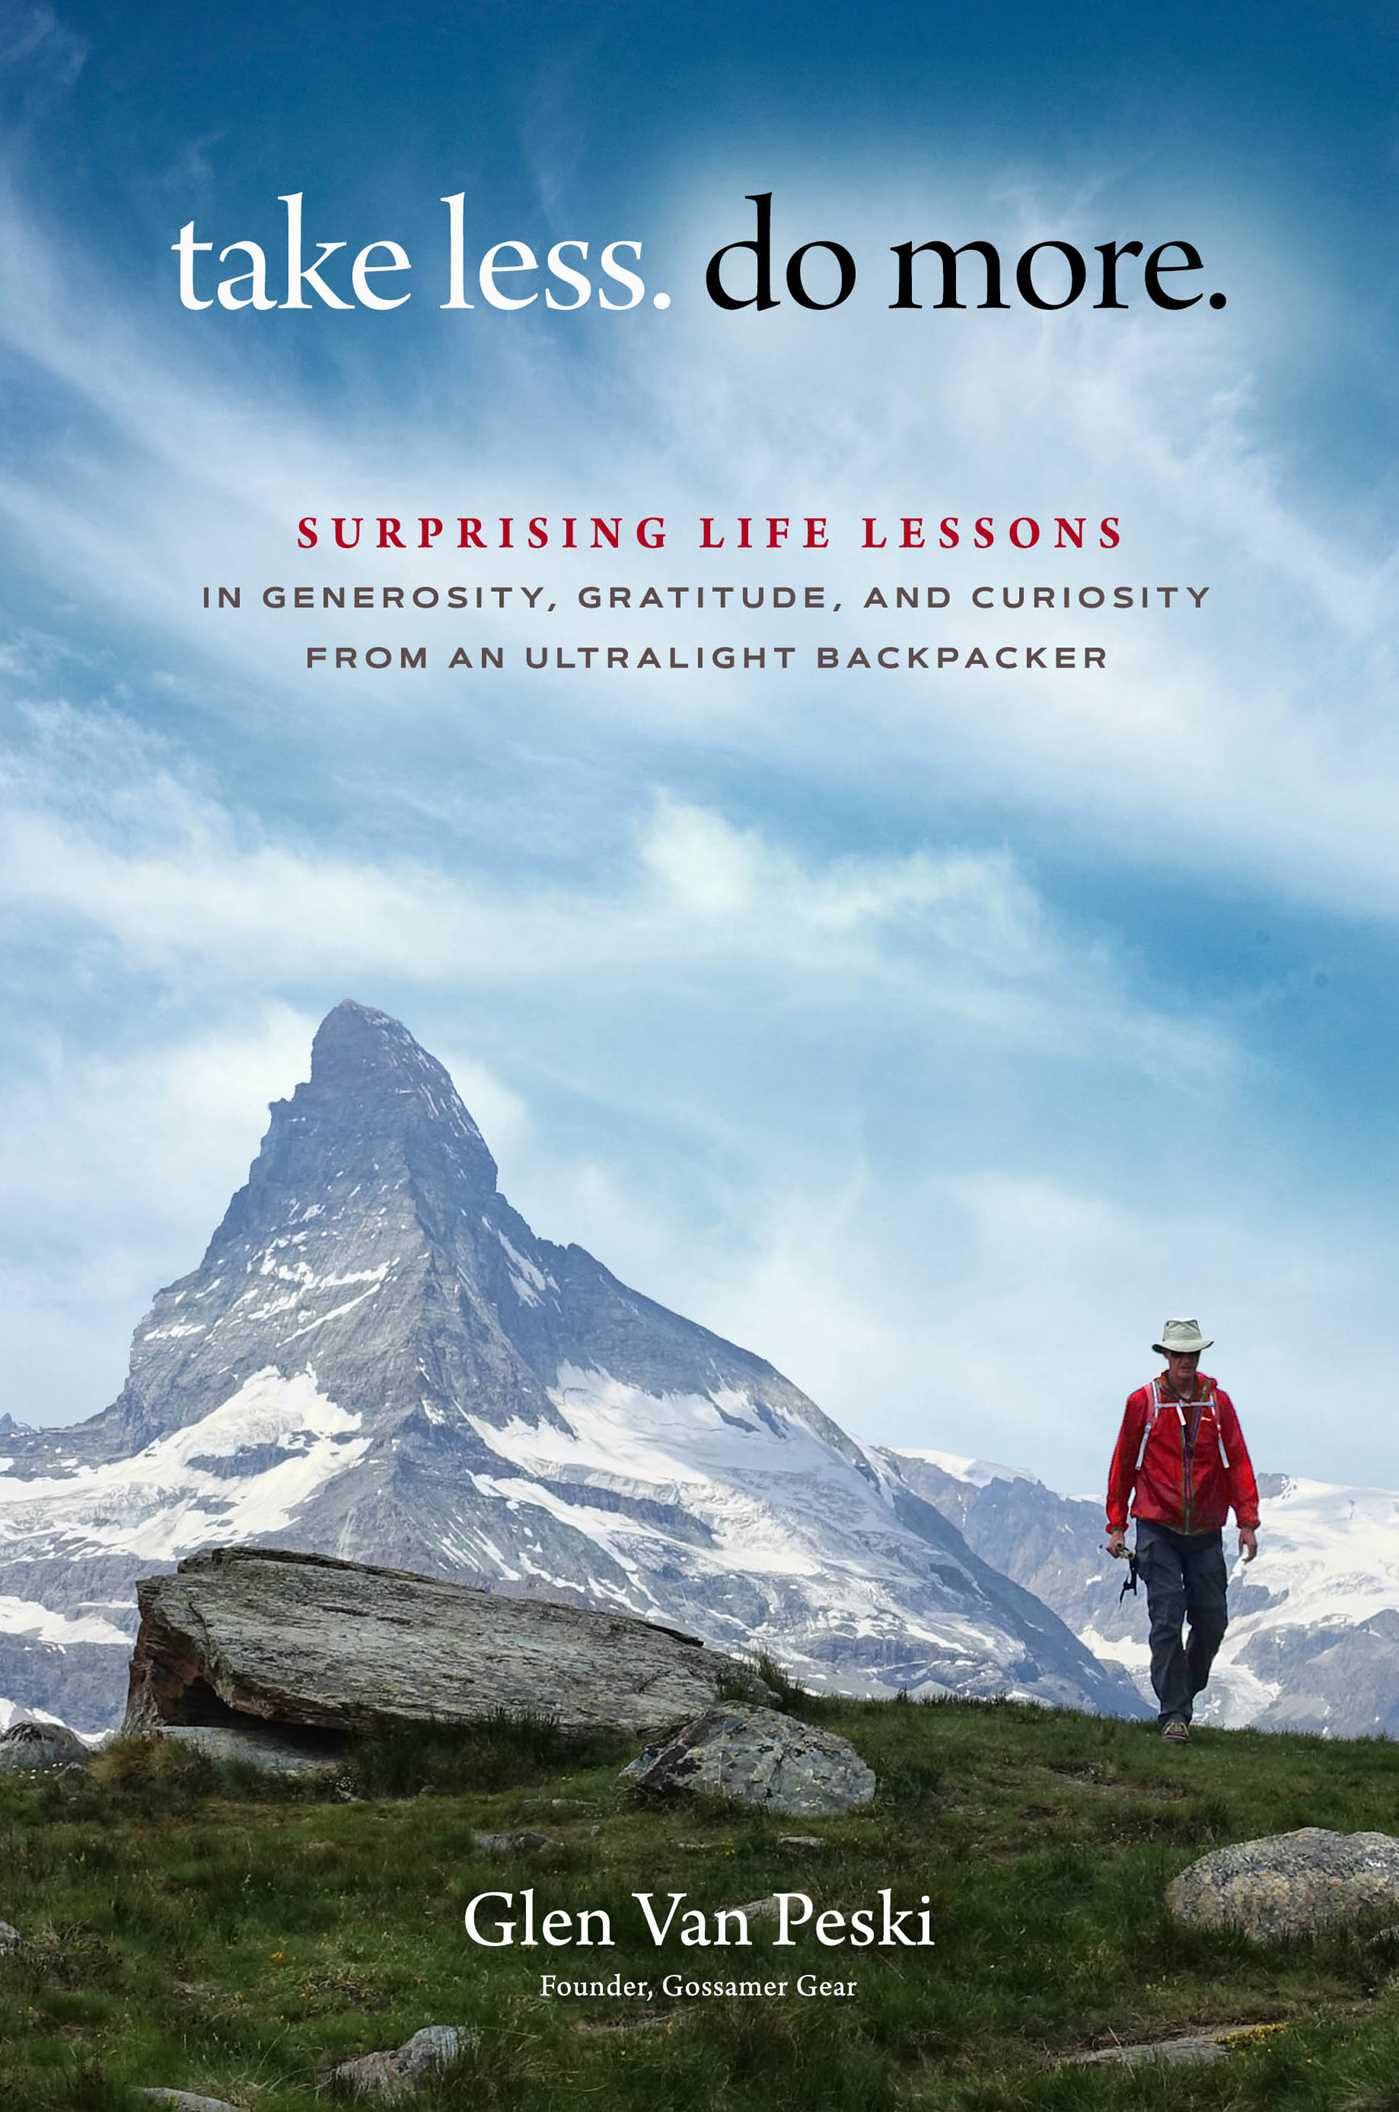 Take Less. Do More.: Surprising Life Lessons in Generosity, Gratitude, and Curiosity from an Ultralight Backpacker